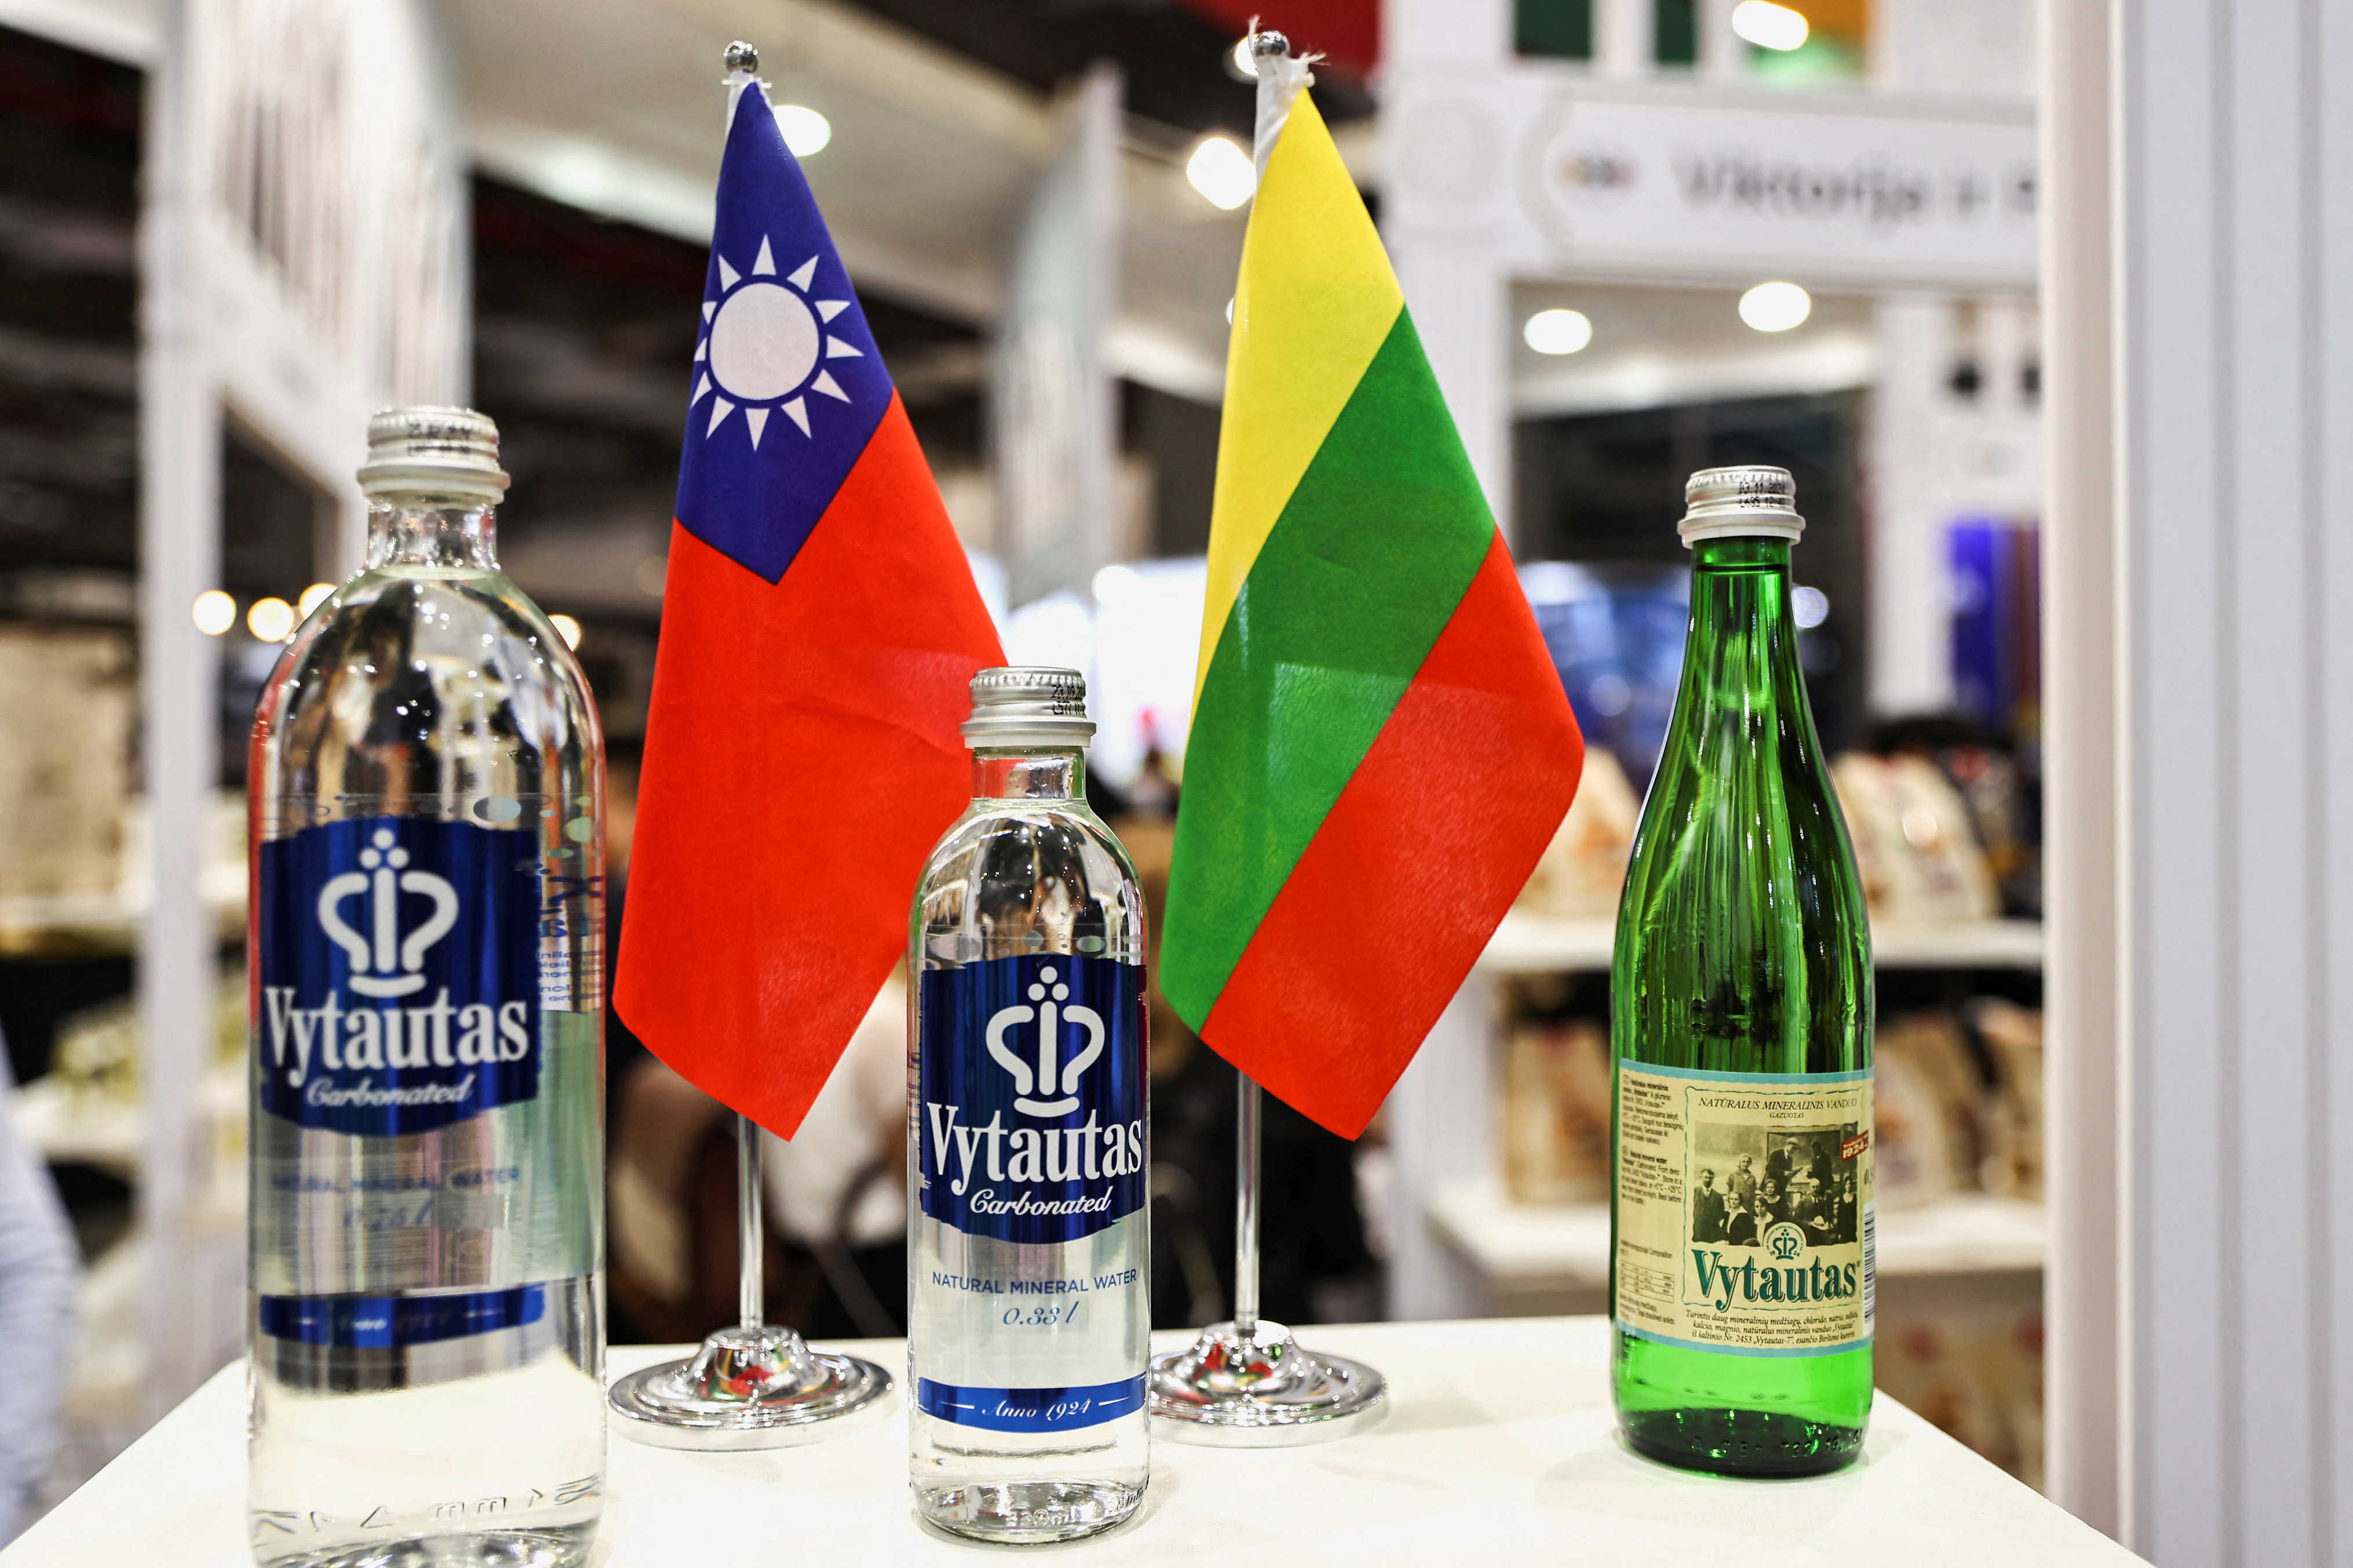 Martin - Taiwanese and Lithuanian flags are seen at the Taipei International Food Show in Taipei, Taiwan, June 22, 2022.